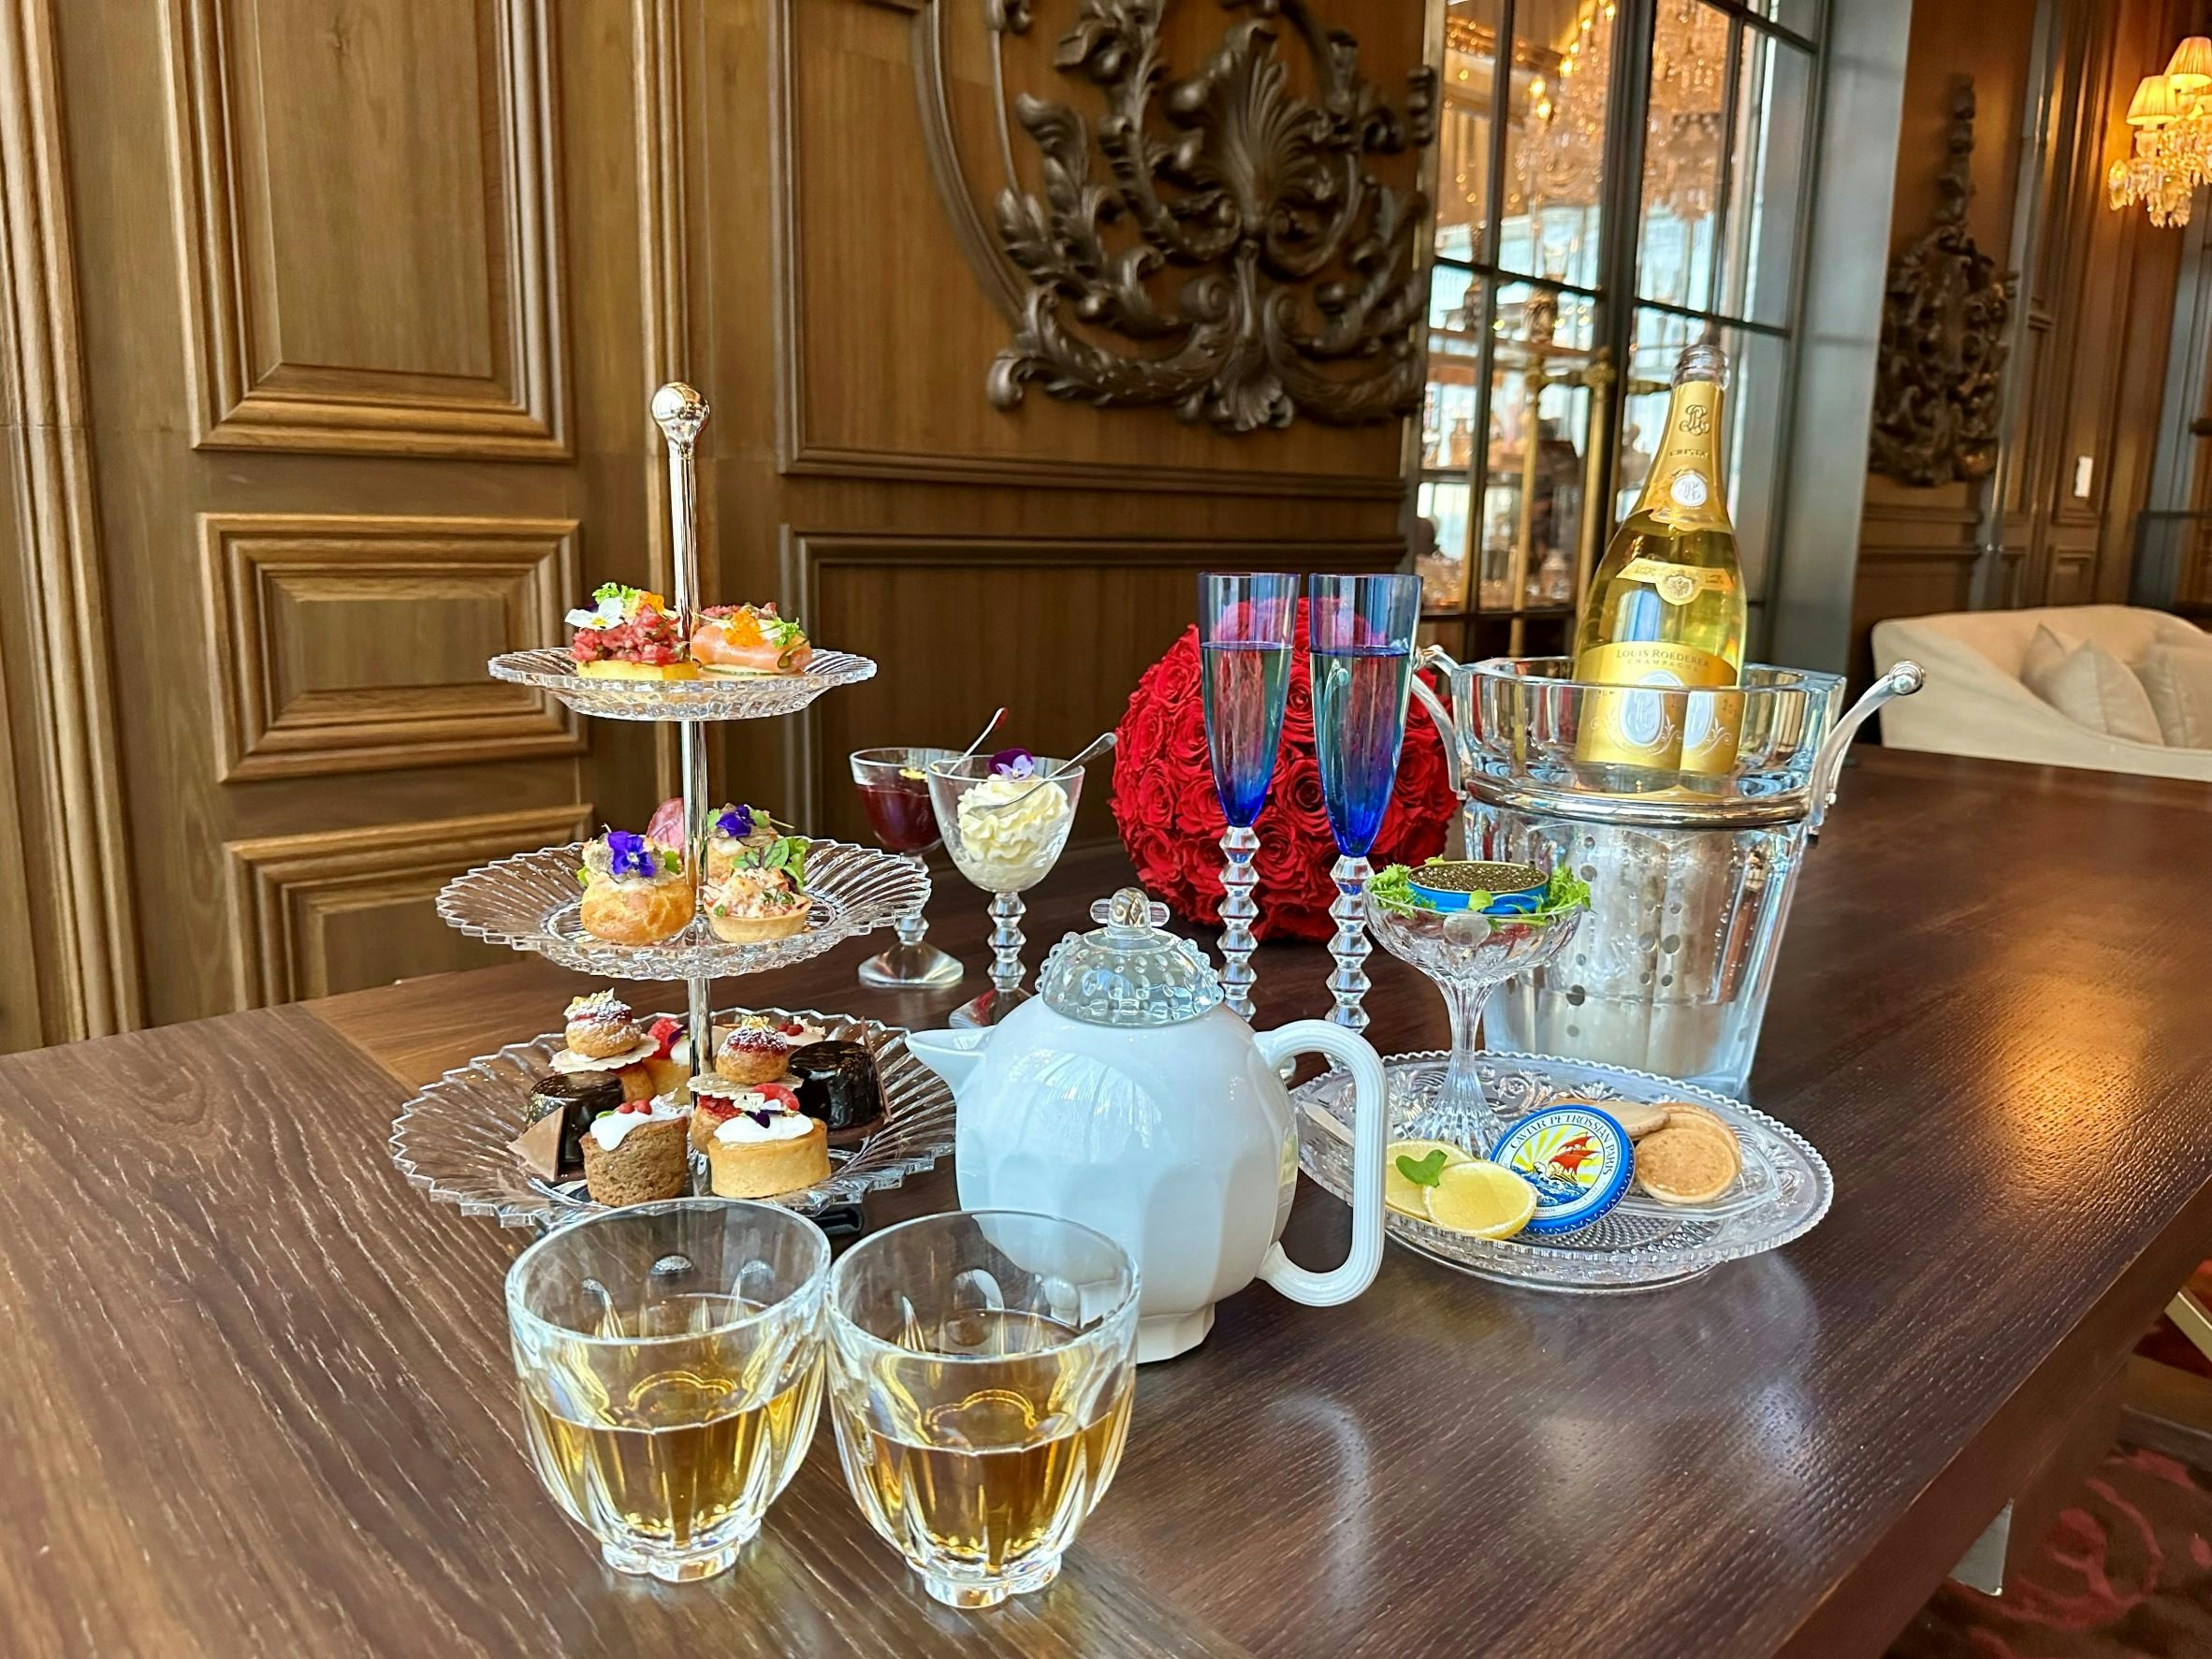 Baccarat Hotel New York offers a luxurious Crystal Tea experience that is served in the Grand Salon, at 3,000 for two people. Photo: Baccarat